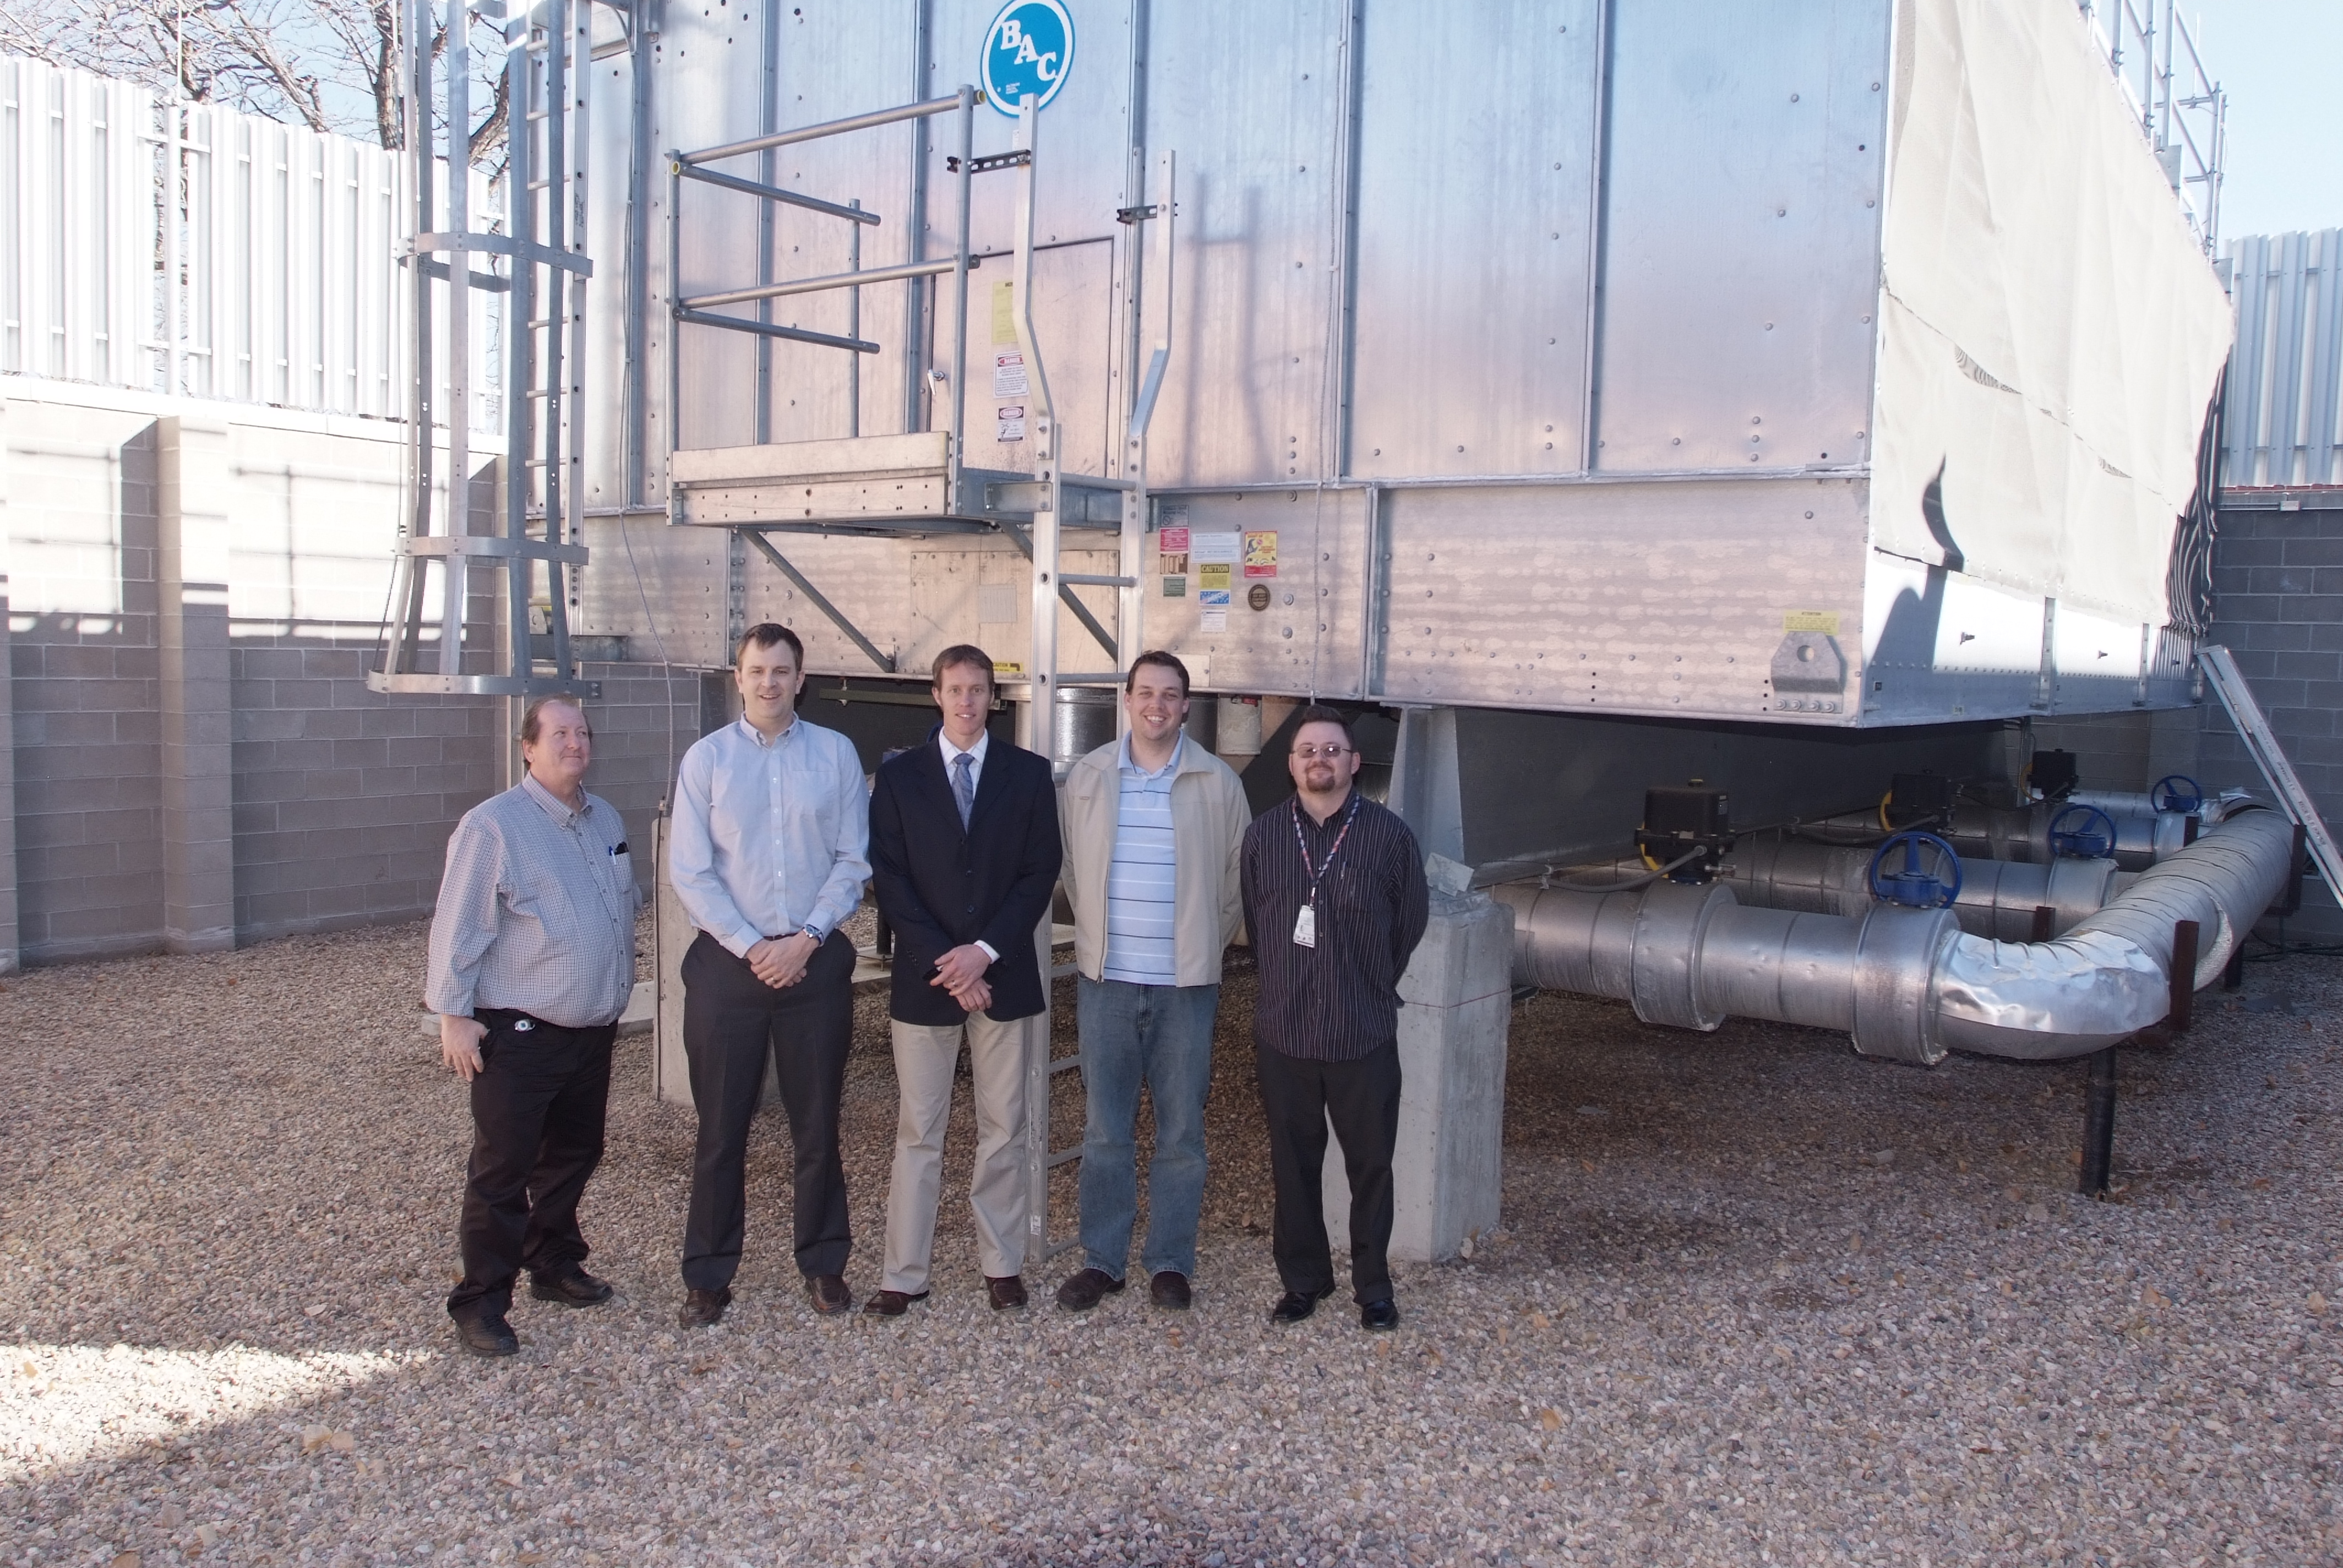 Non-traditional water treatment cooling tower and program participants.